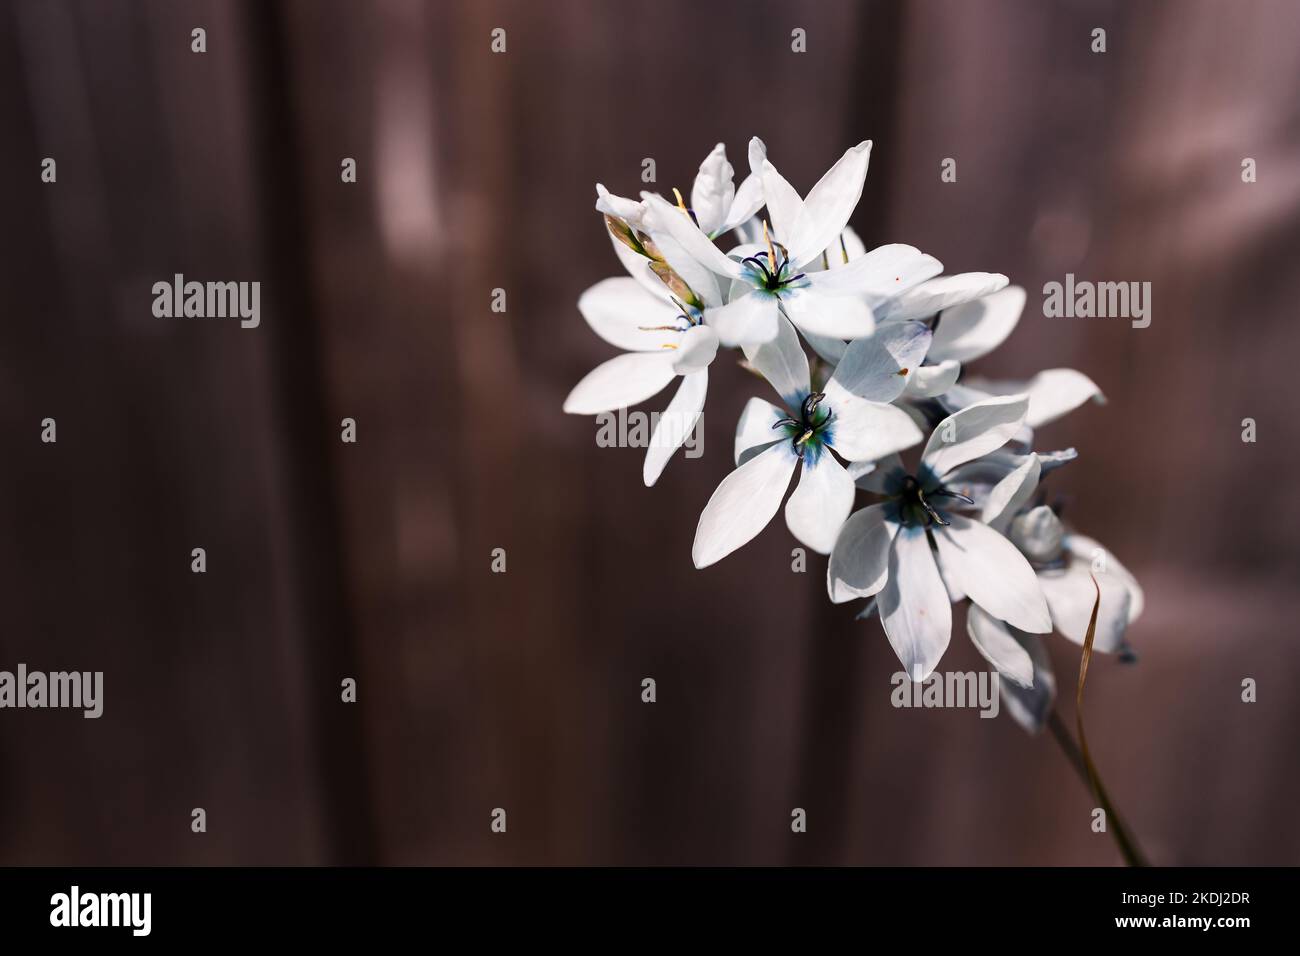 close-up of Ixia African corn lillies plant with blue flowers outdoor shot at shallow depth of field Stock Photo